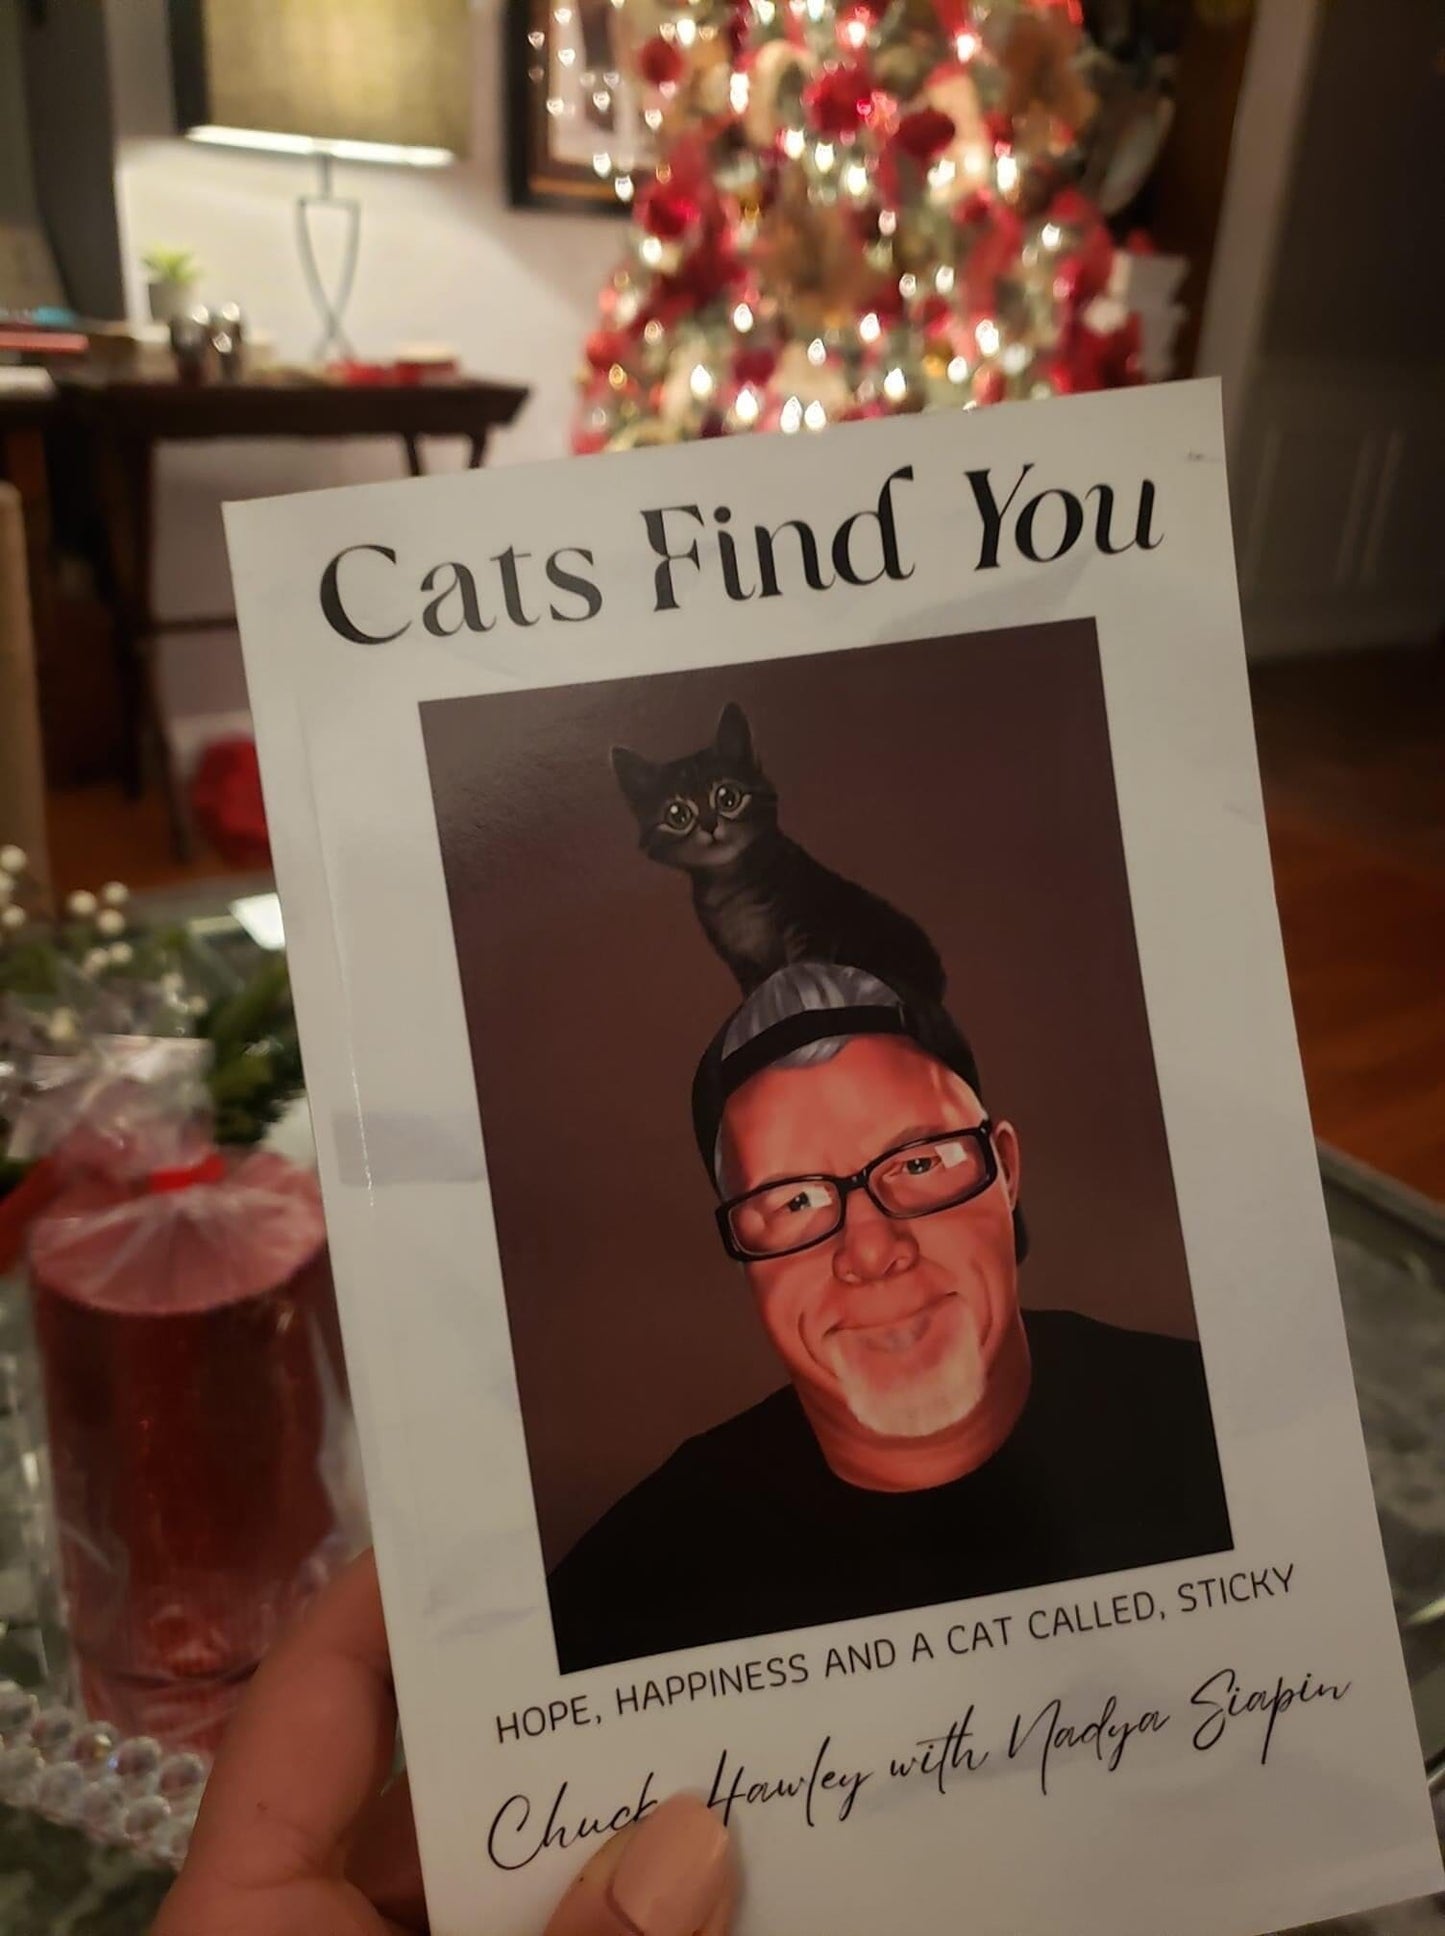 Cats Find You; Hardcover - Hope, Happiness and a cat called Sticky; Personalized and Autographed and shipped in a life size giant head envelope... for better or worse!:)